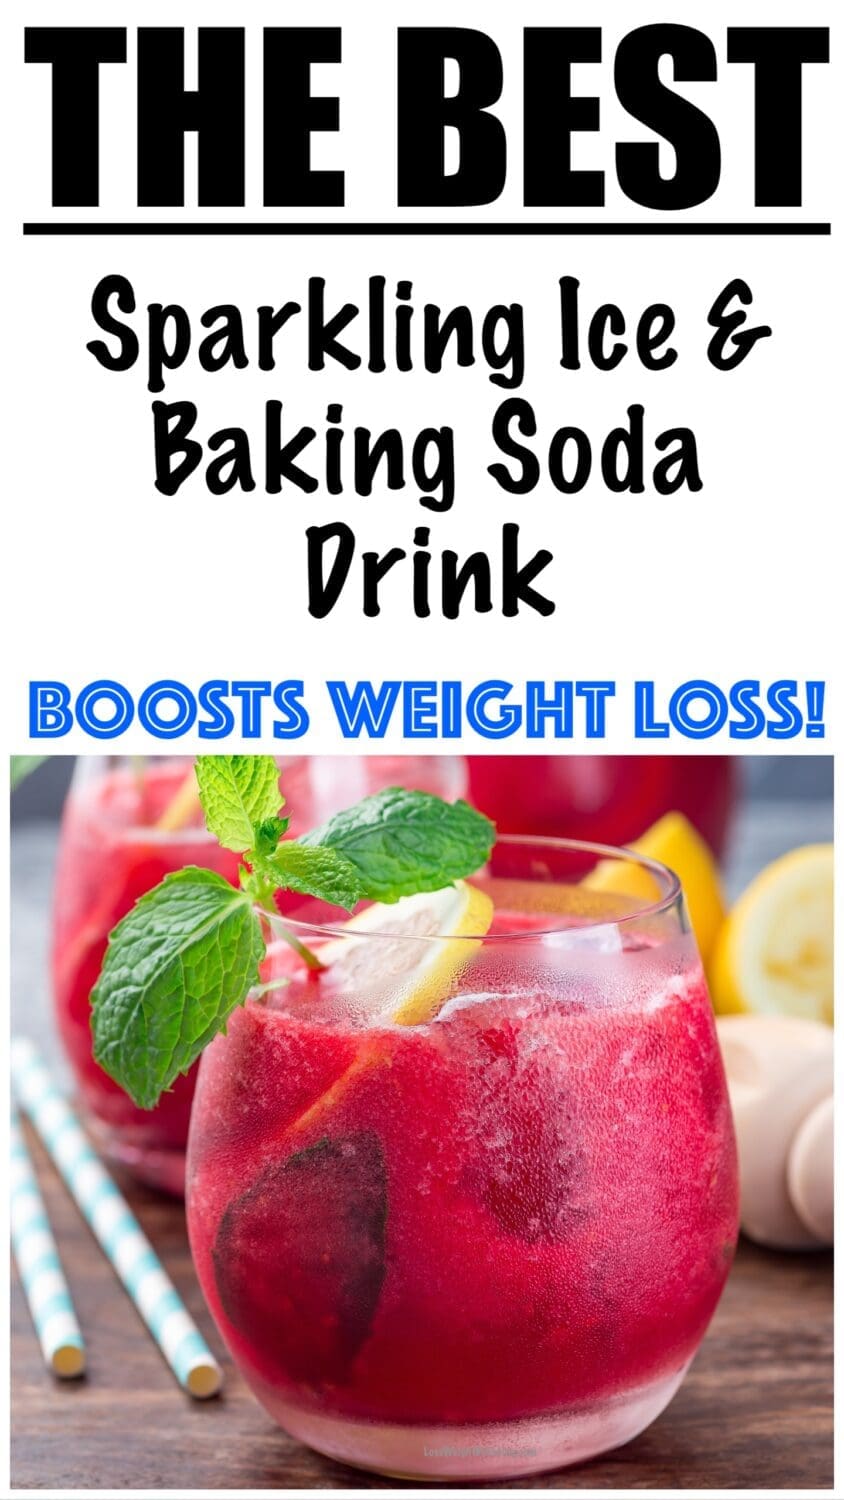 Sparkling Ice and Baking Soda Drink for Weight Loss